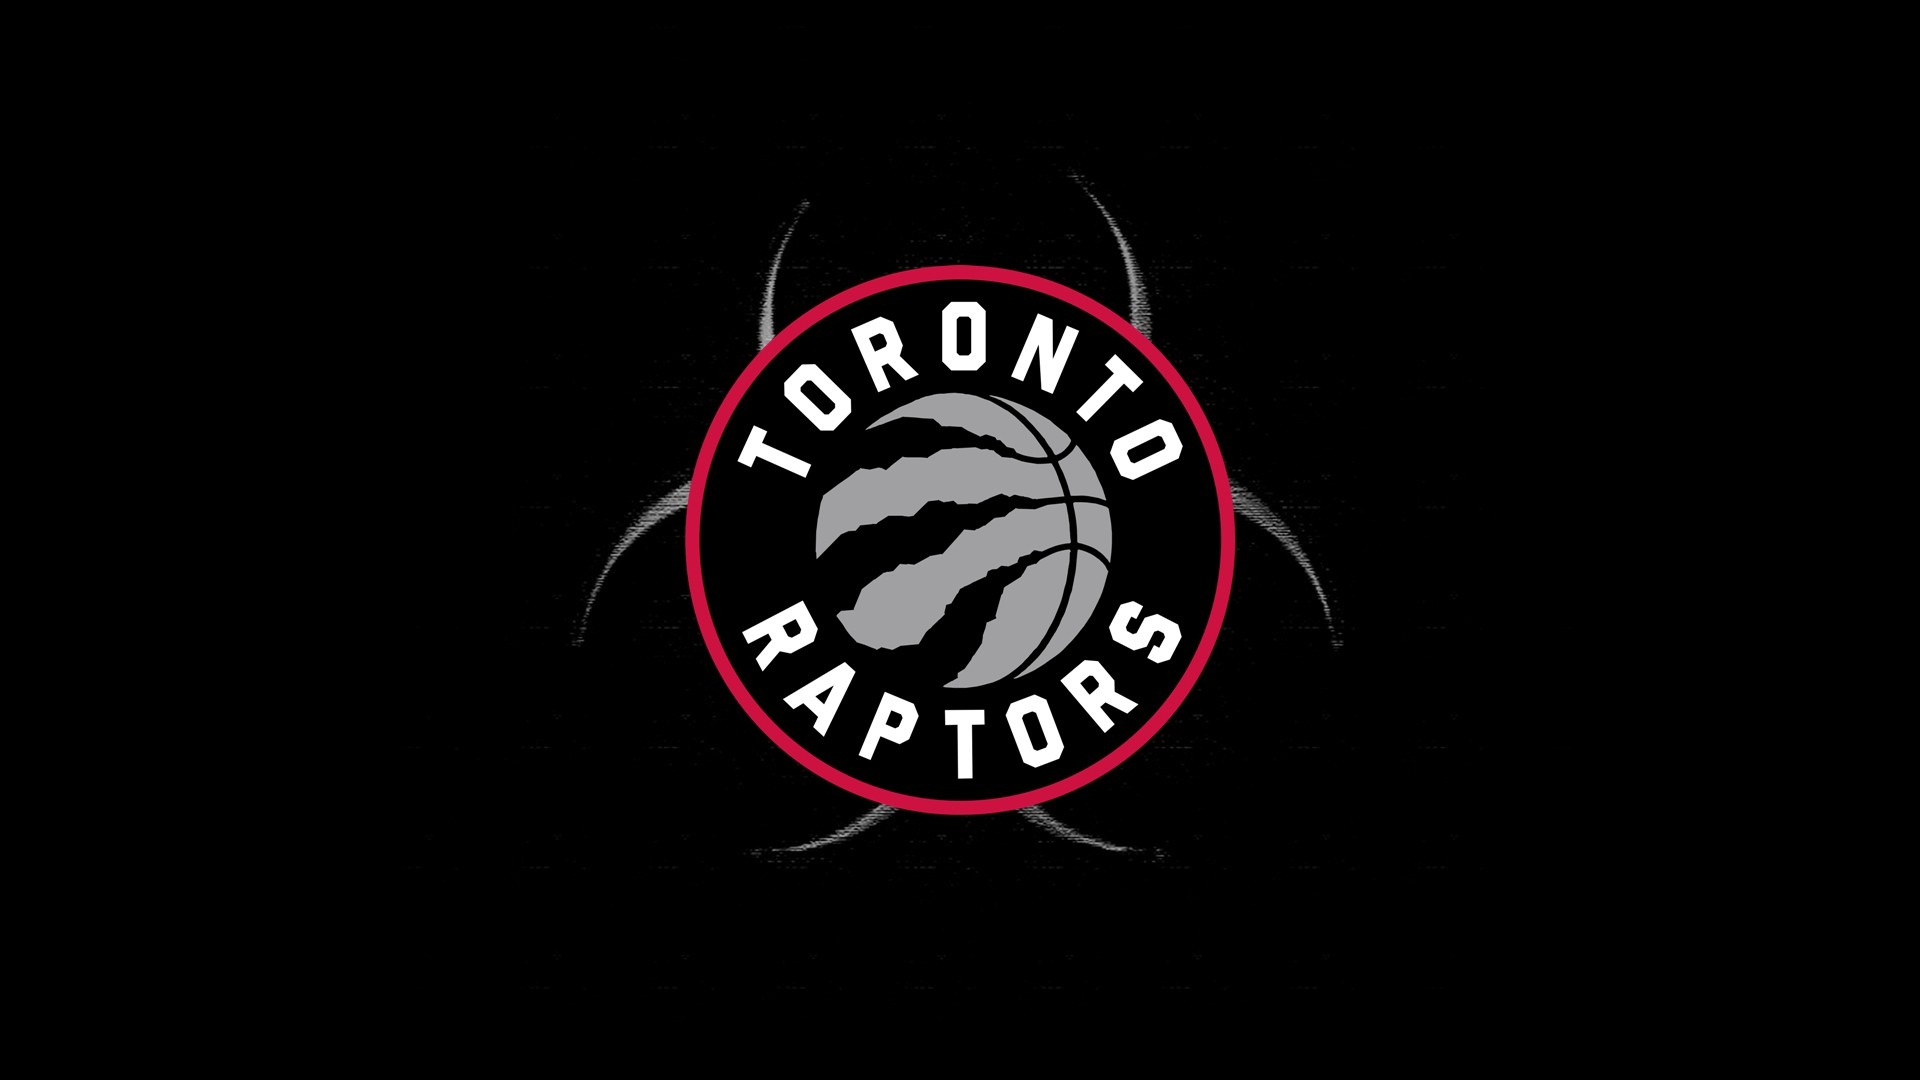 Raptors Basketball Wallpaper with image dimensions 1920x1080 pixel. You can make this wallpaper for your Desktop Computer Backgrounds, Windows or Mac Screensavers, iPhone Lock screen, Tablet or Android and another Mobile Phone device